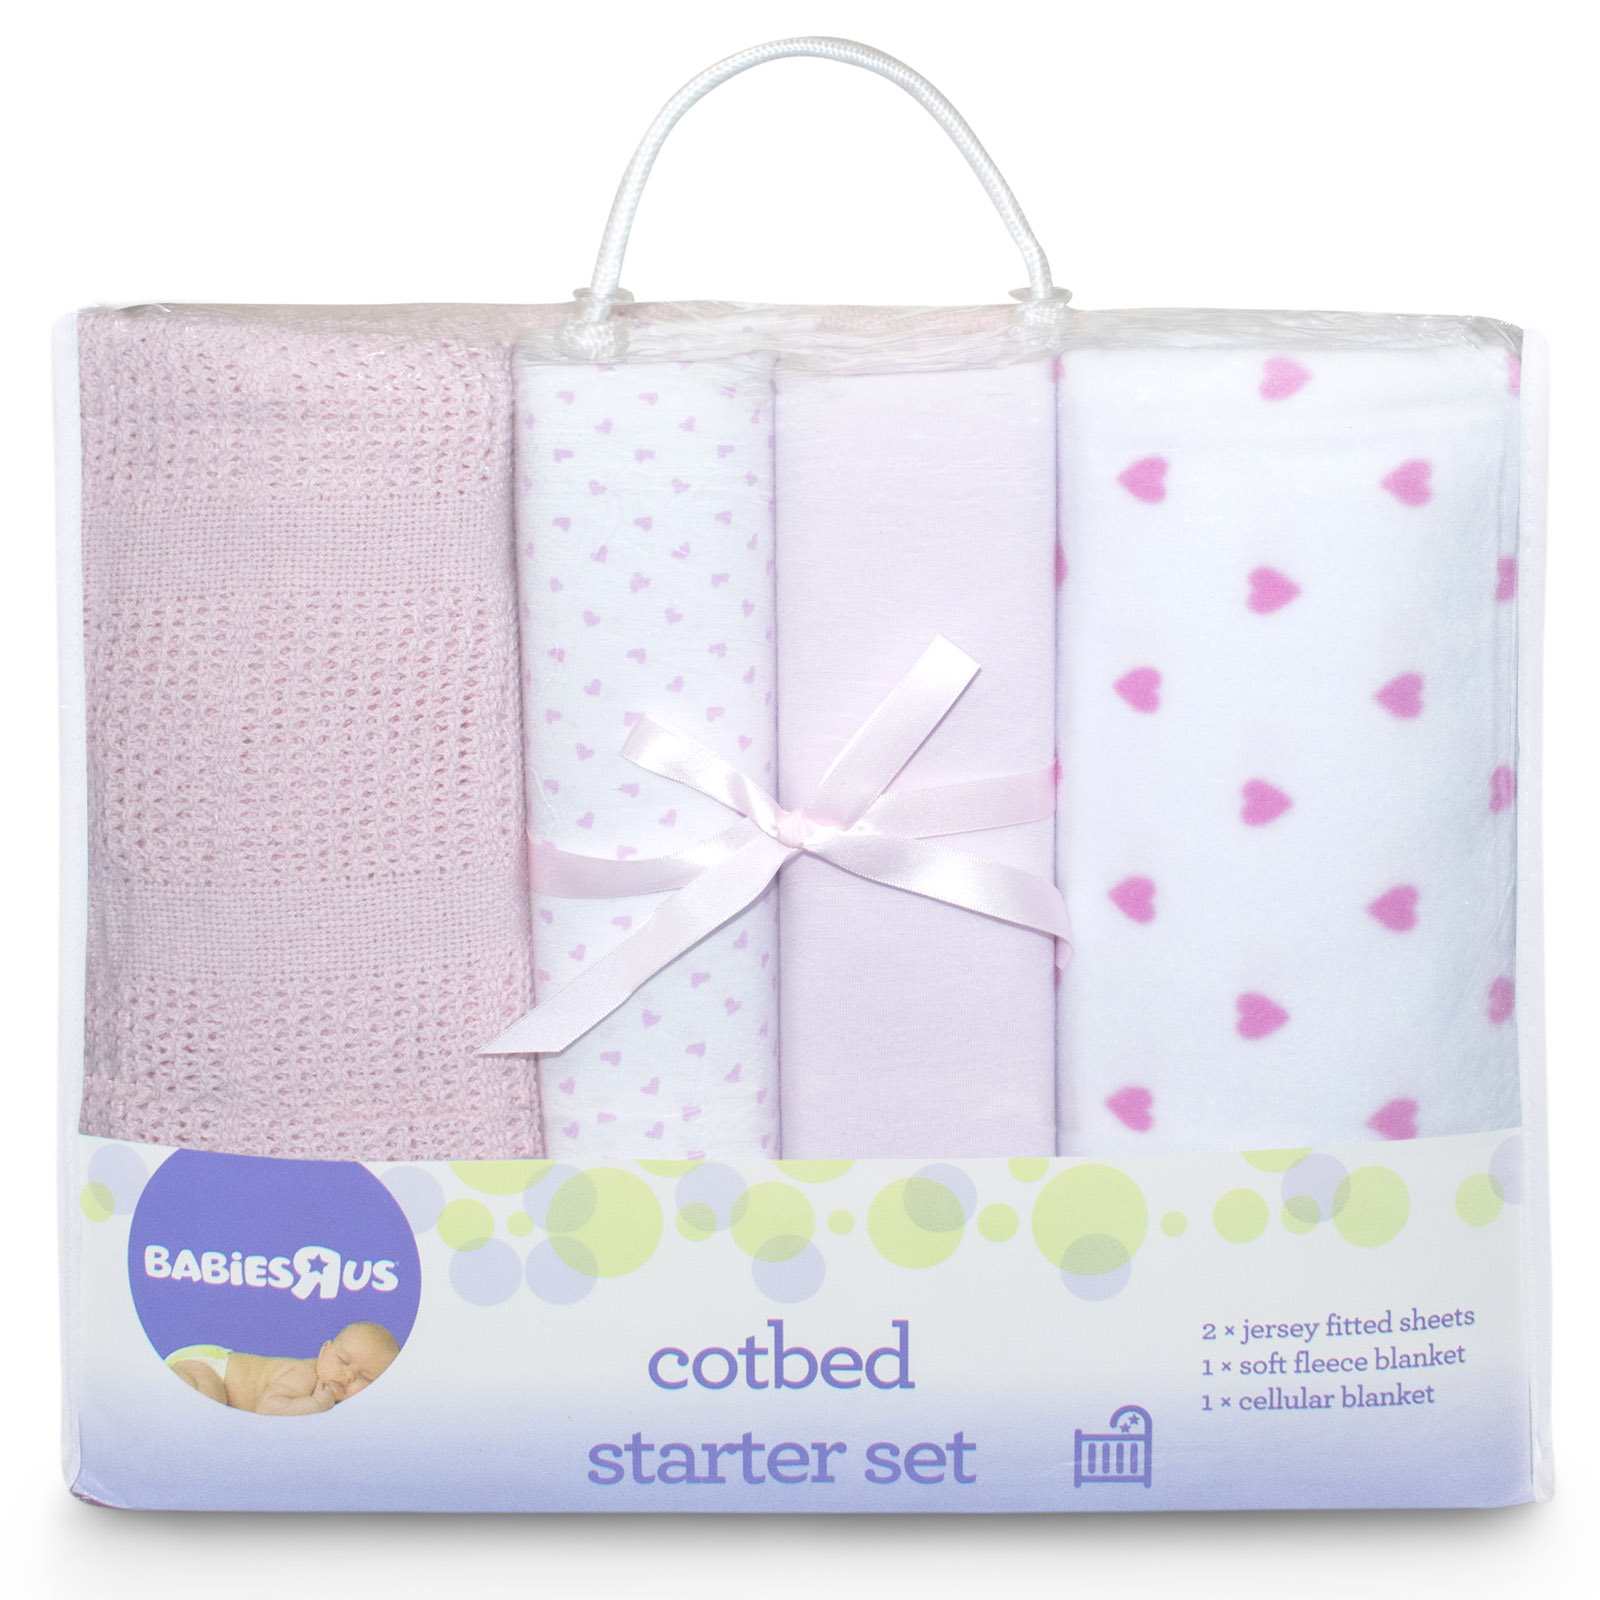 Babies R Us Mothercare 4 Piece Cot Bed Starter Set Pink Heart Buy At Online4baby